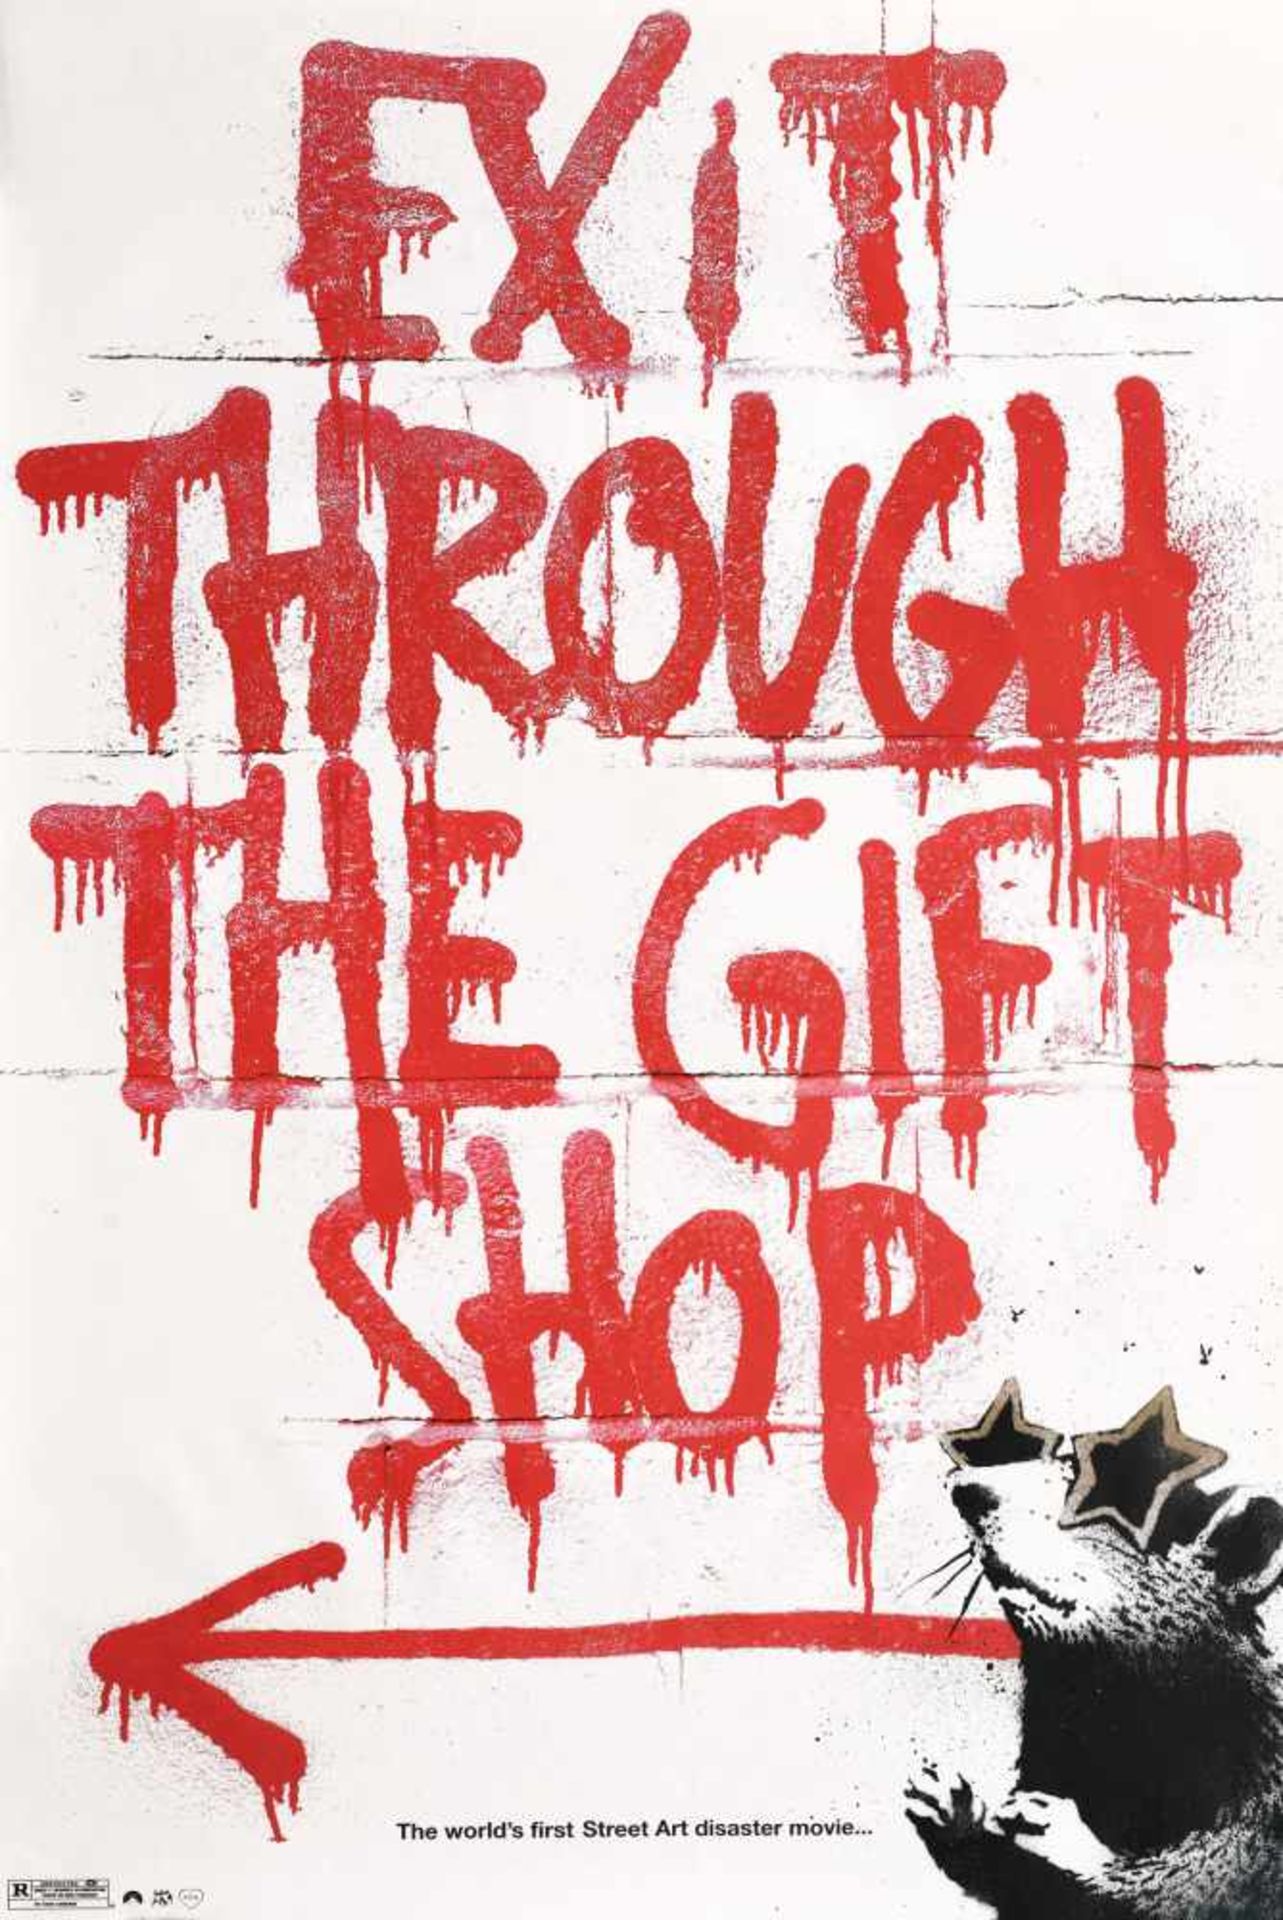 Movie poster - "Exit through the gift shop", directed by Banksy Banksy, 2010